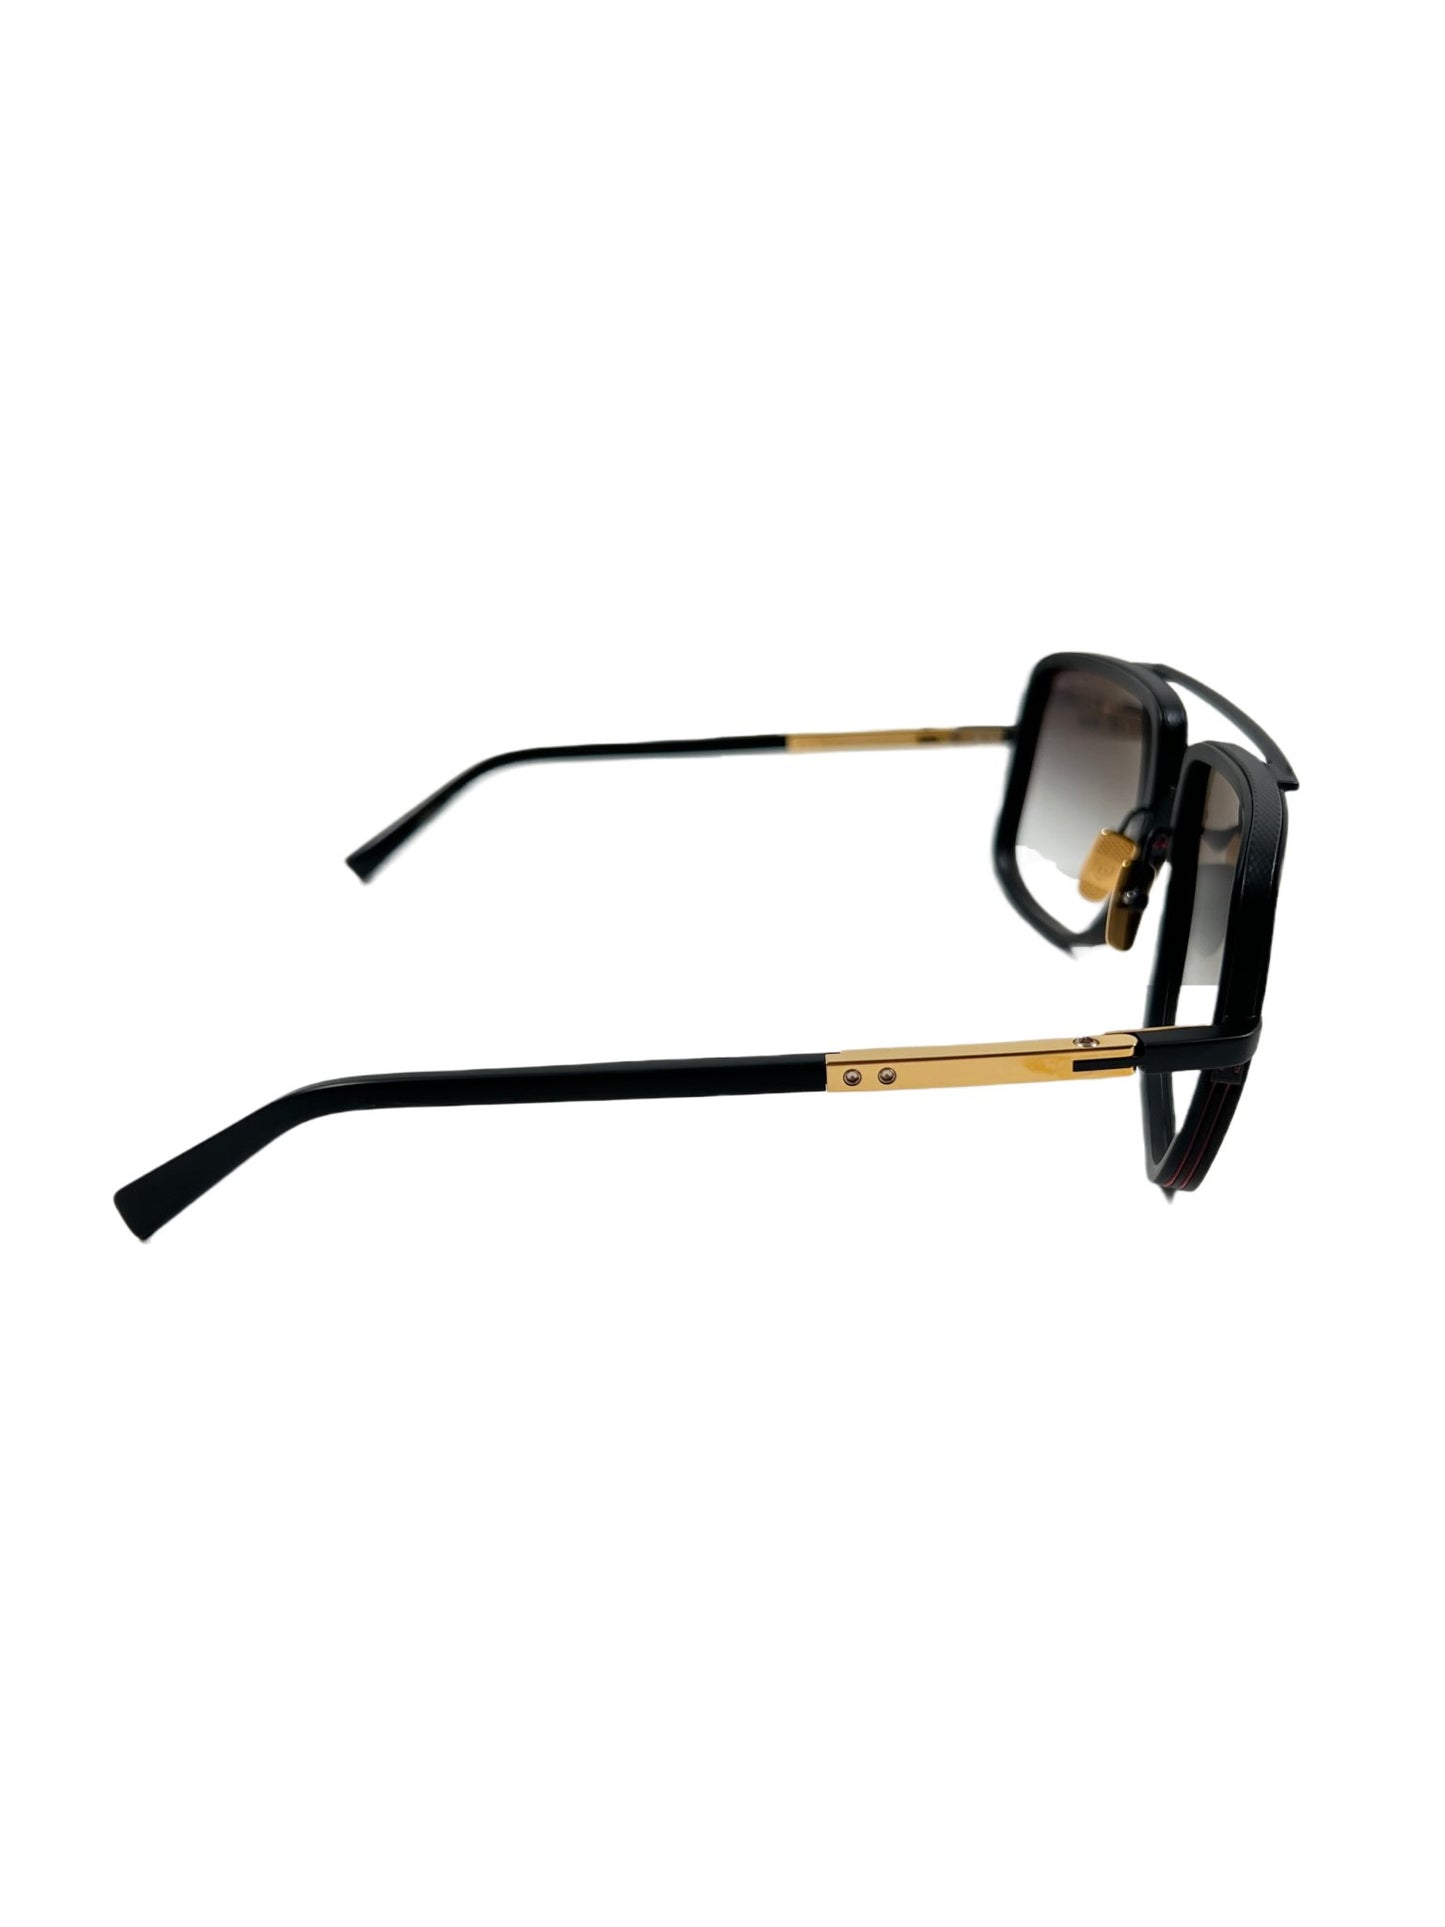 Luxury eyewear: Black DITA MACH-ONE DRX-2030-G-BLK-18K-59 sunglasses with gold detailing on the arms, isolated on a white background.